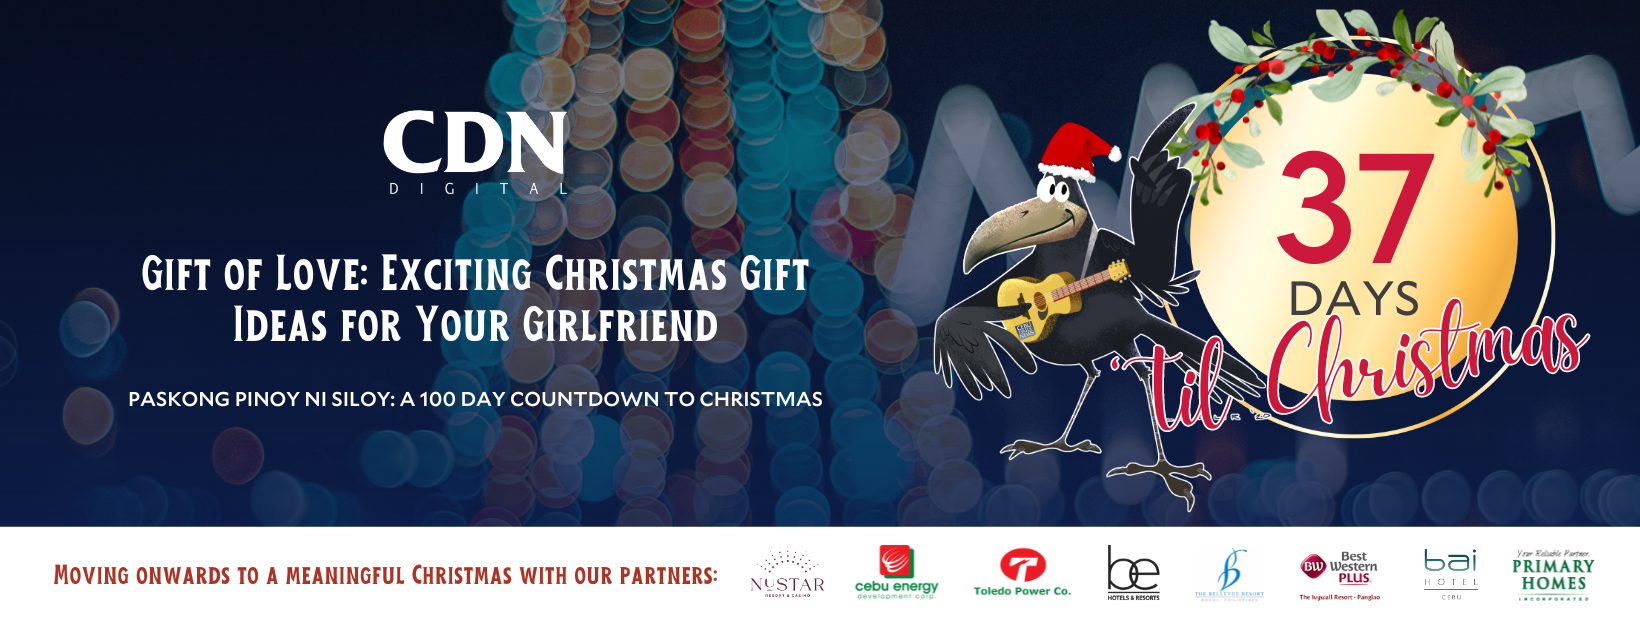 Gift of Love: Exciting Christmas Gift Ideas for Your Girlfriend